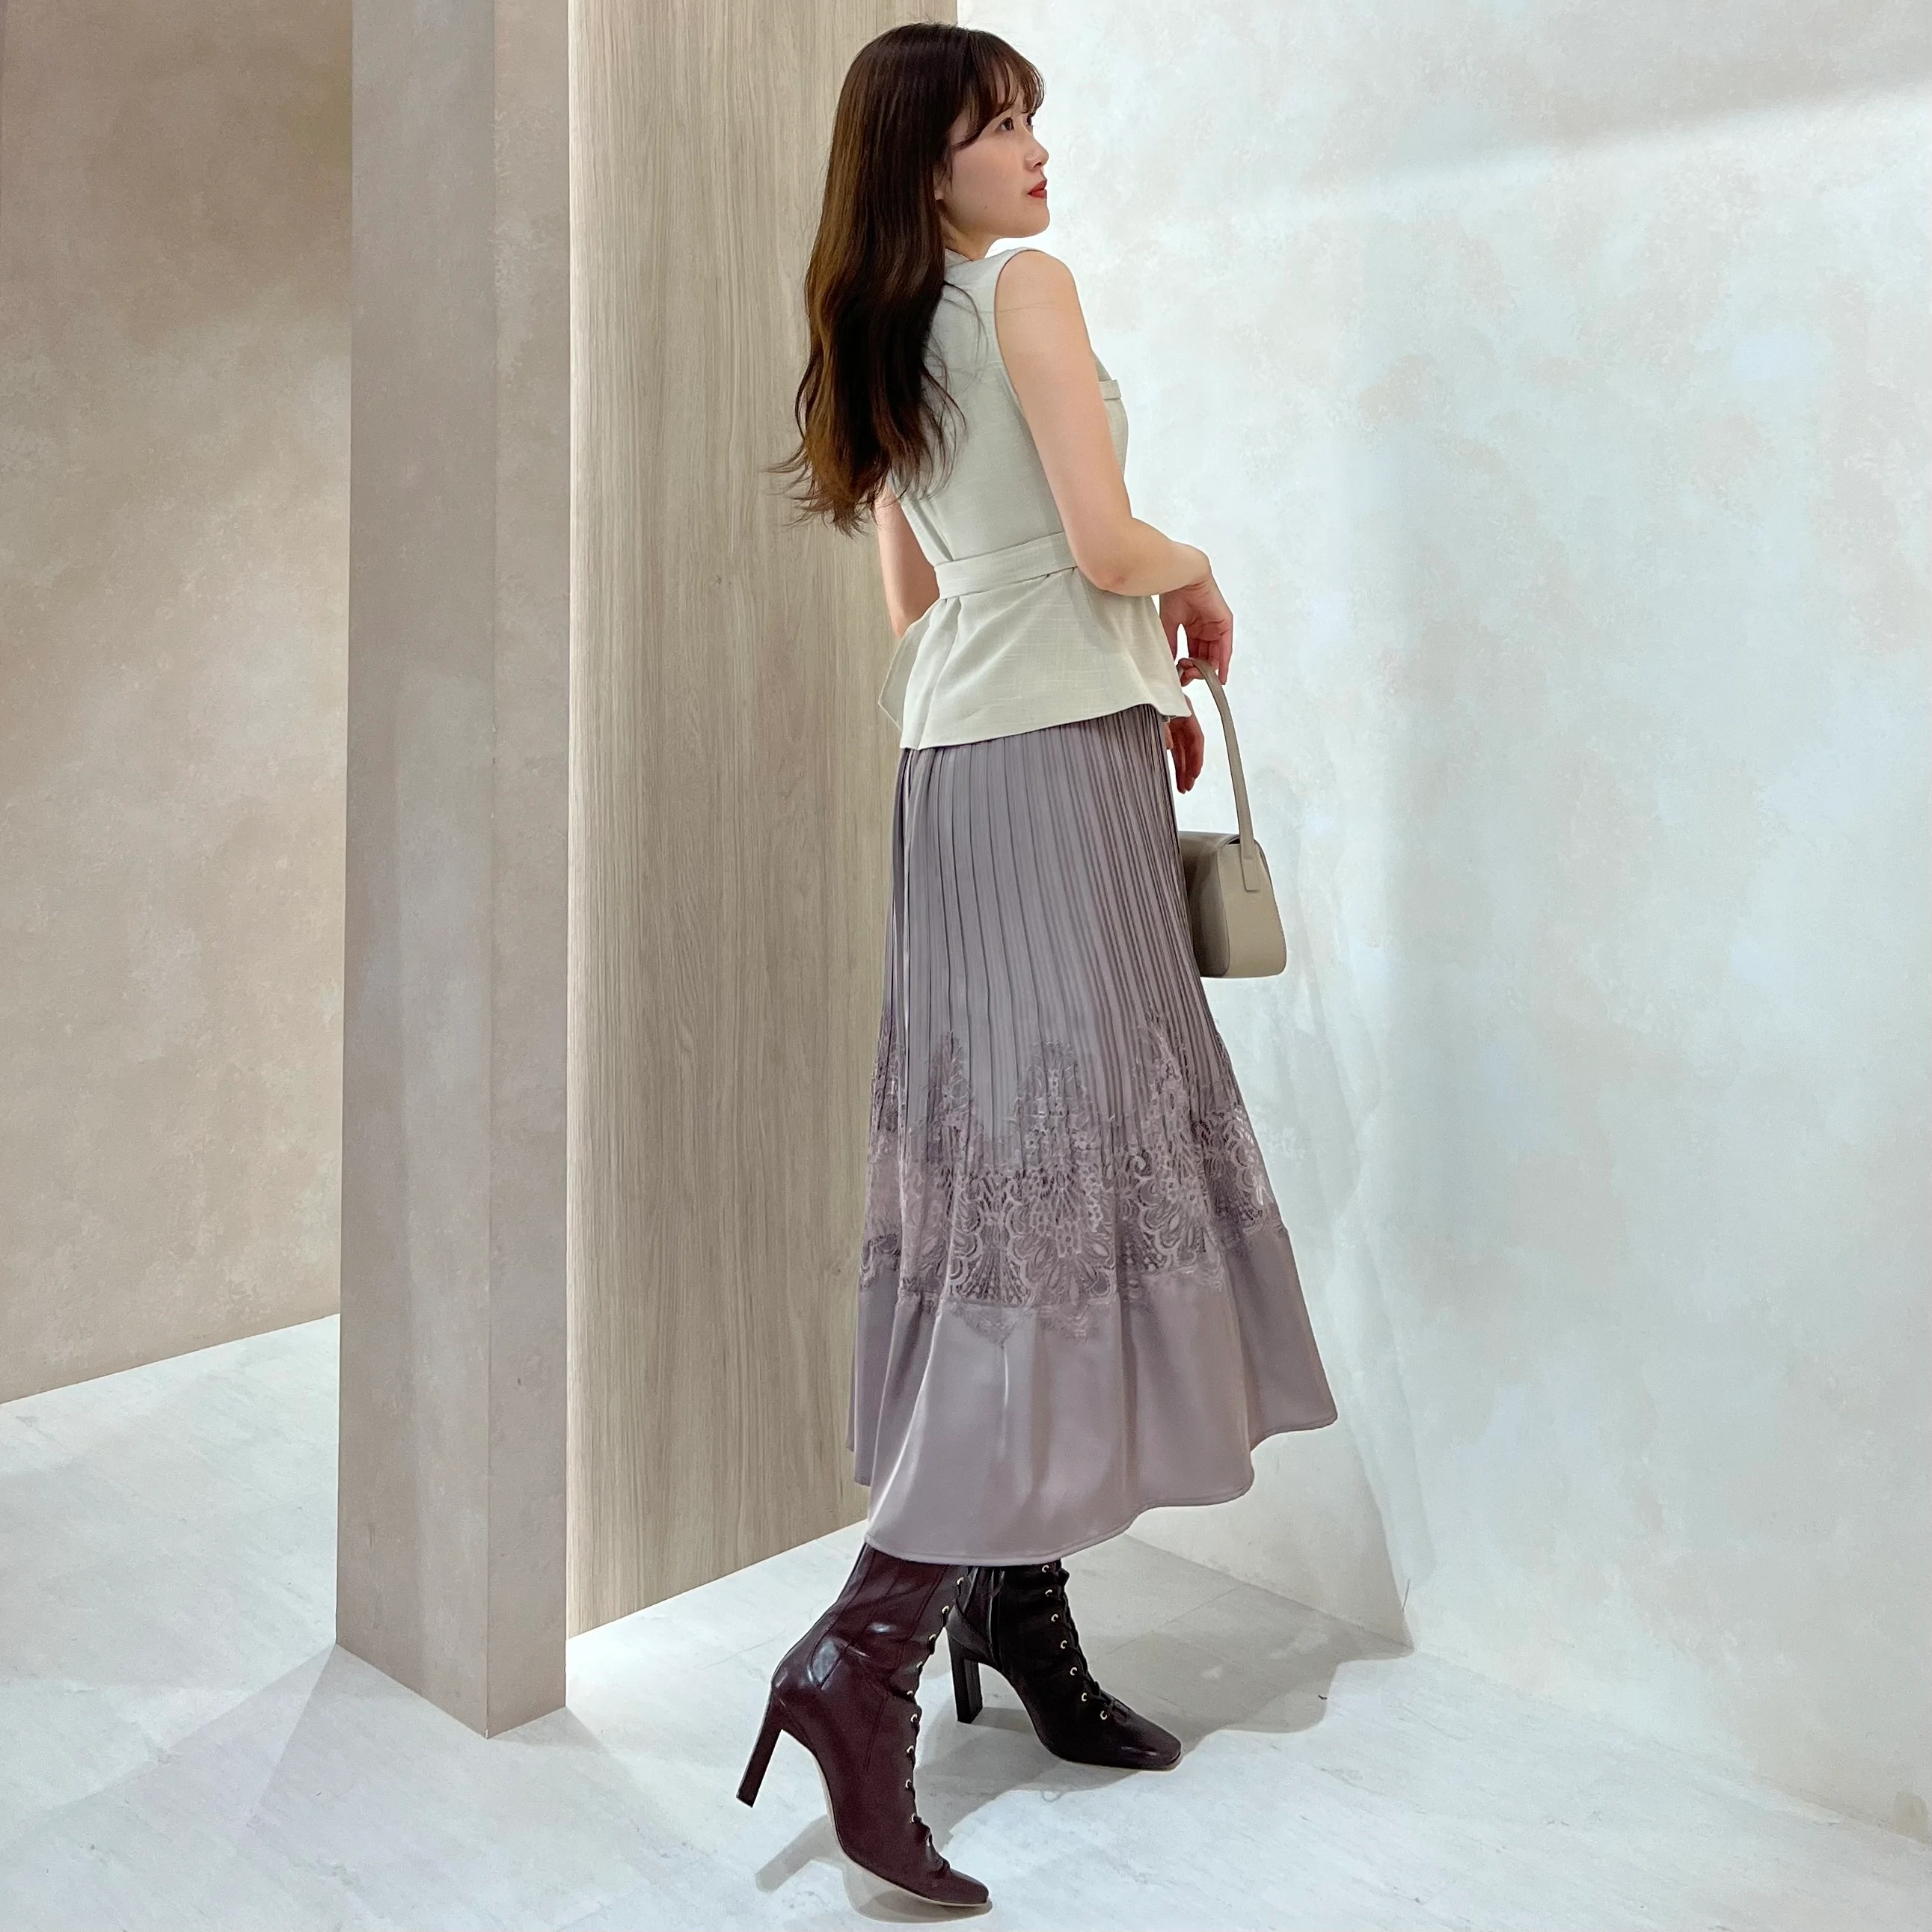 【Her lip to】Meurice Pleated Lace Dress2回着用しました